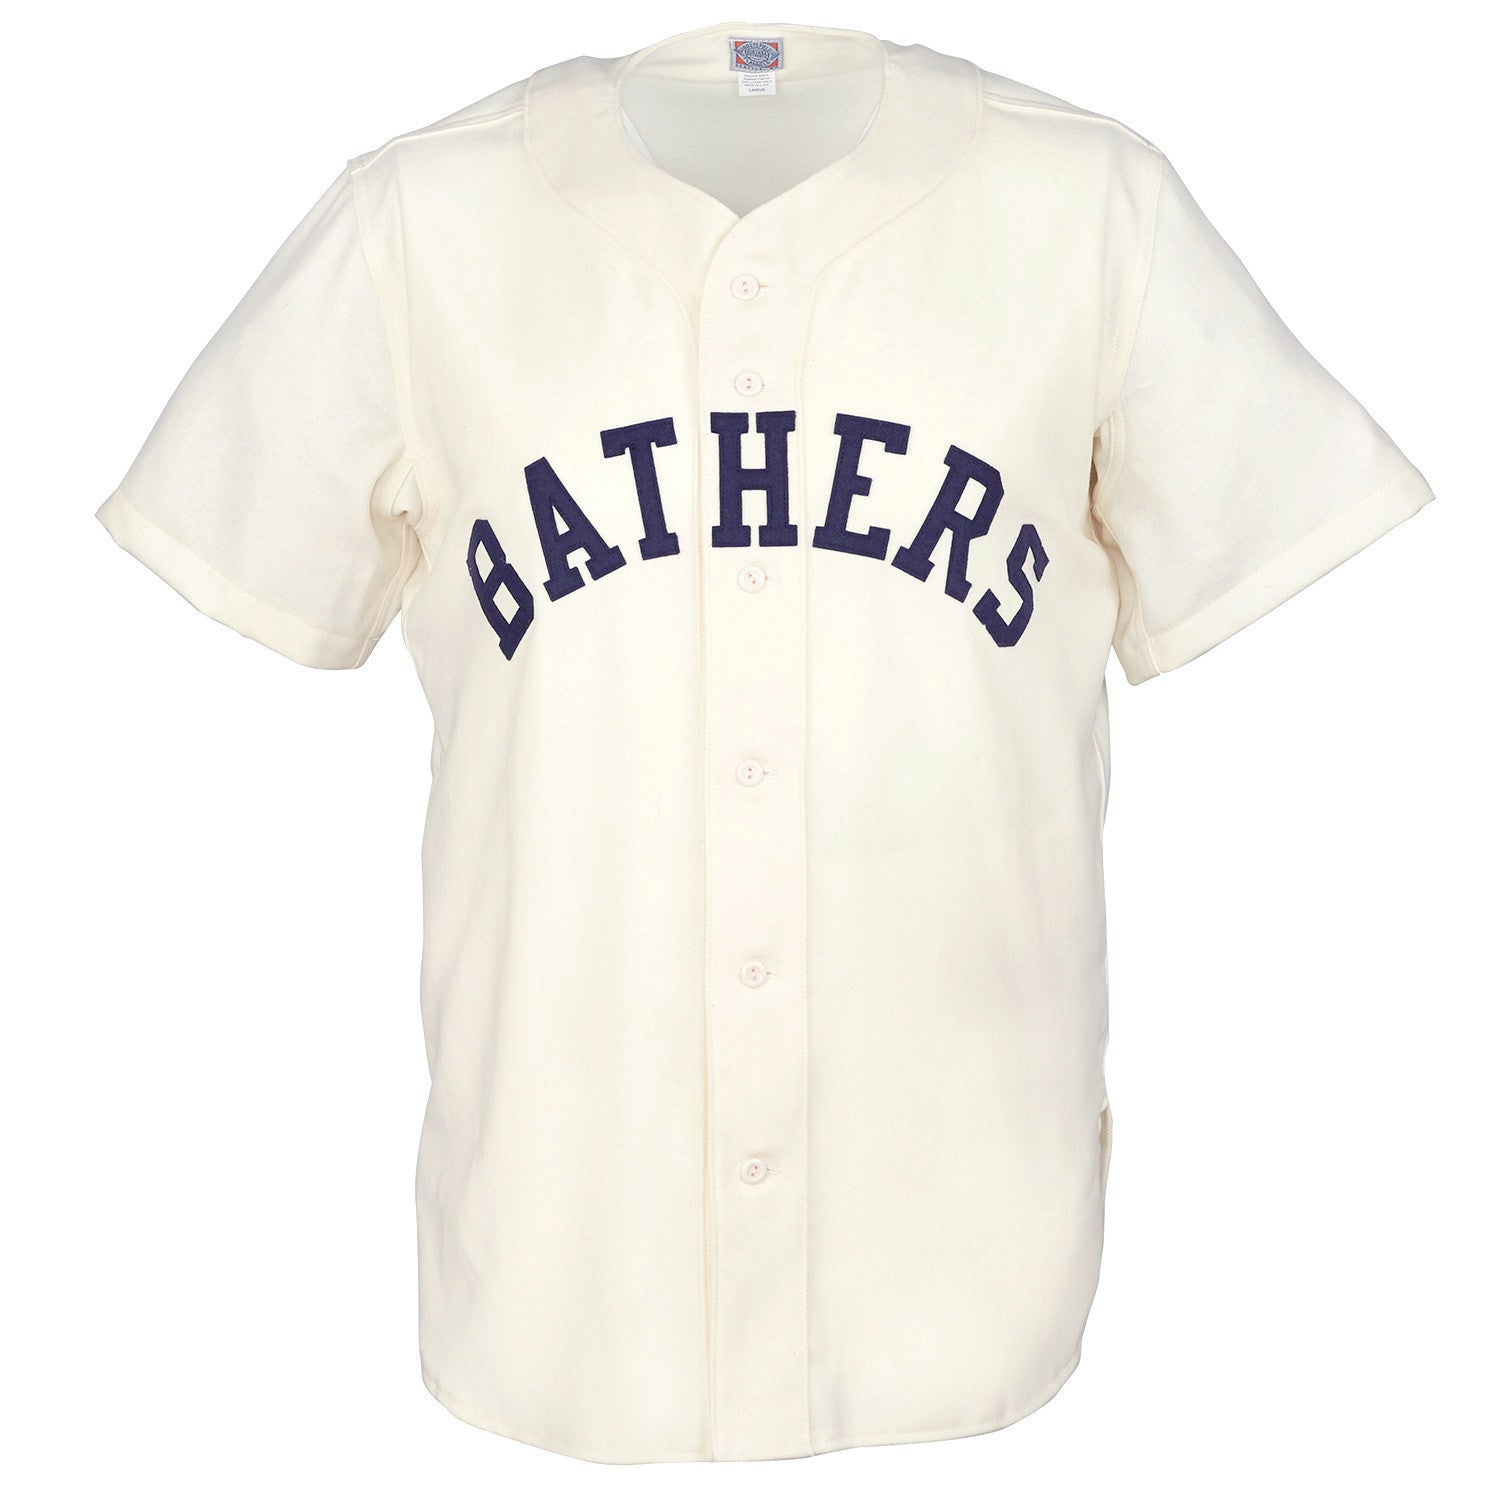 Hot Springs Bathers 1953 Home Jersey